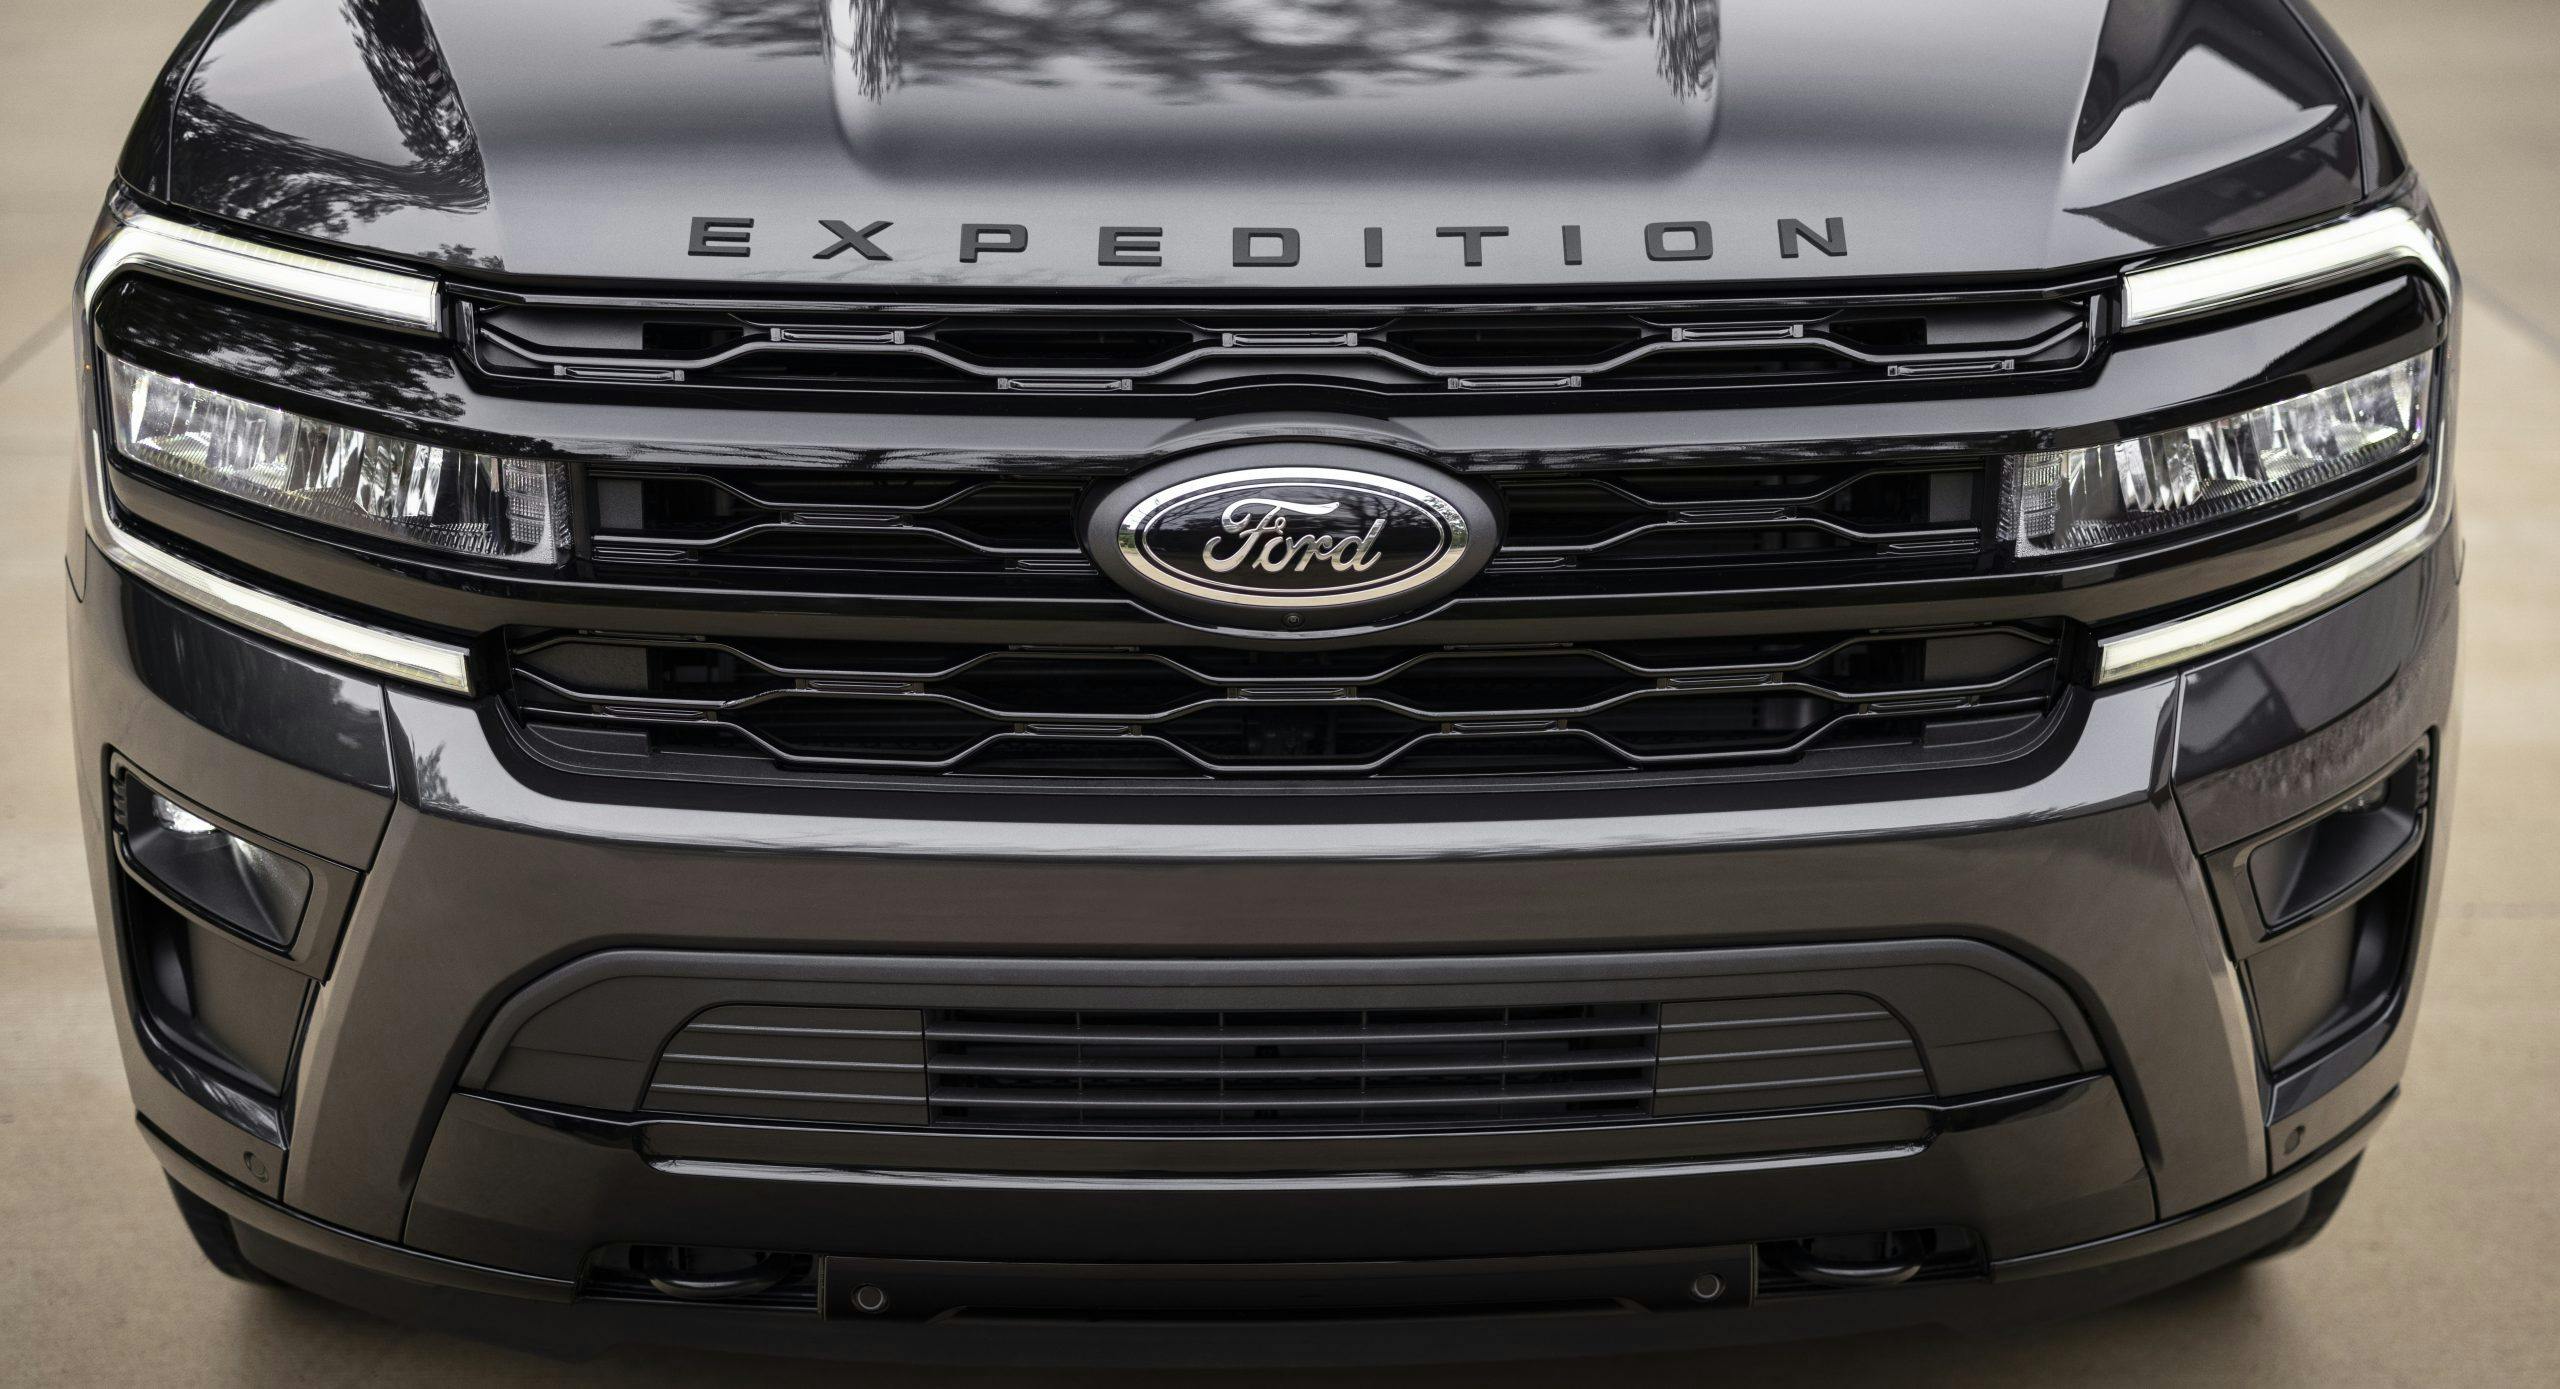 2022 Ford Expedition Stealth Performance front end